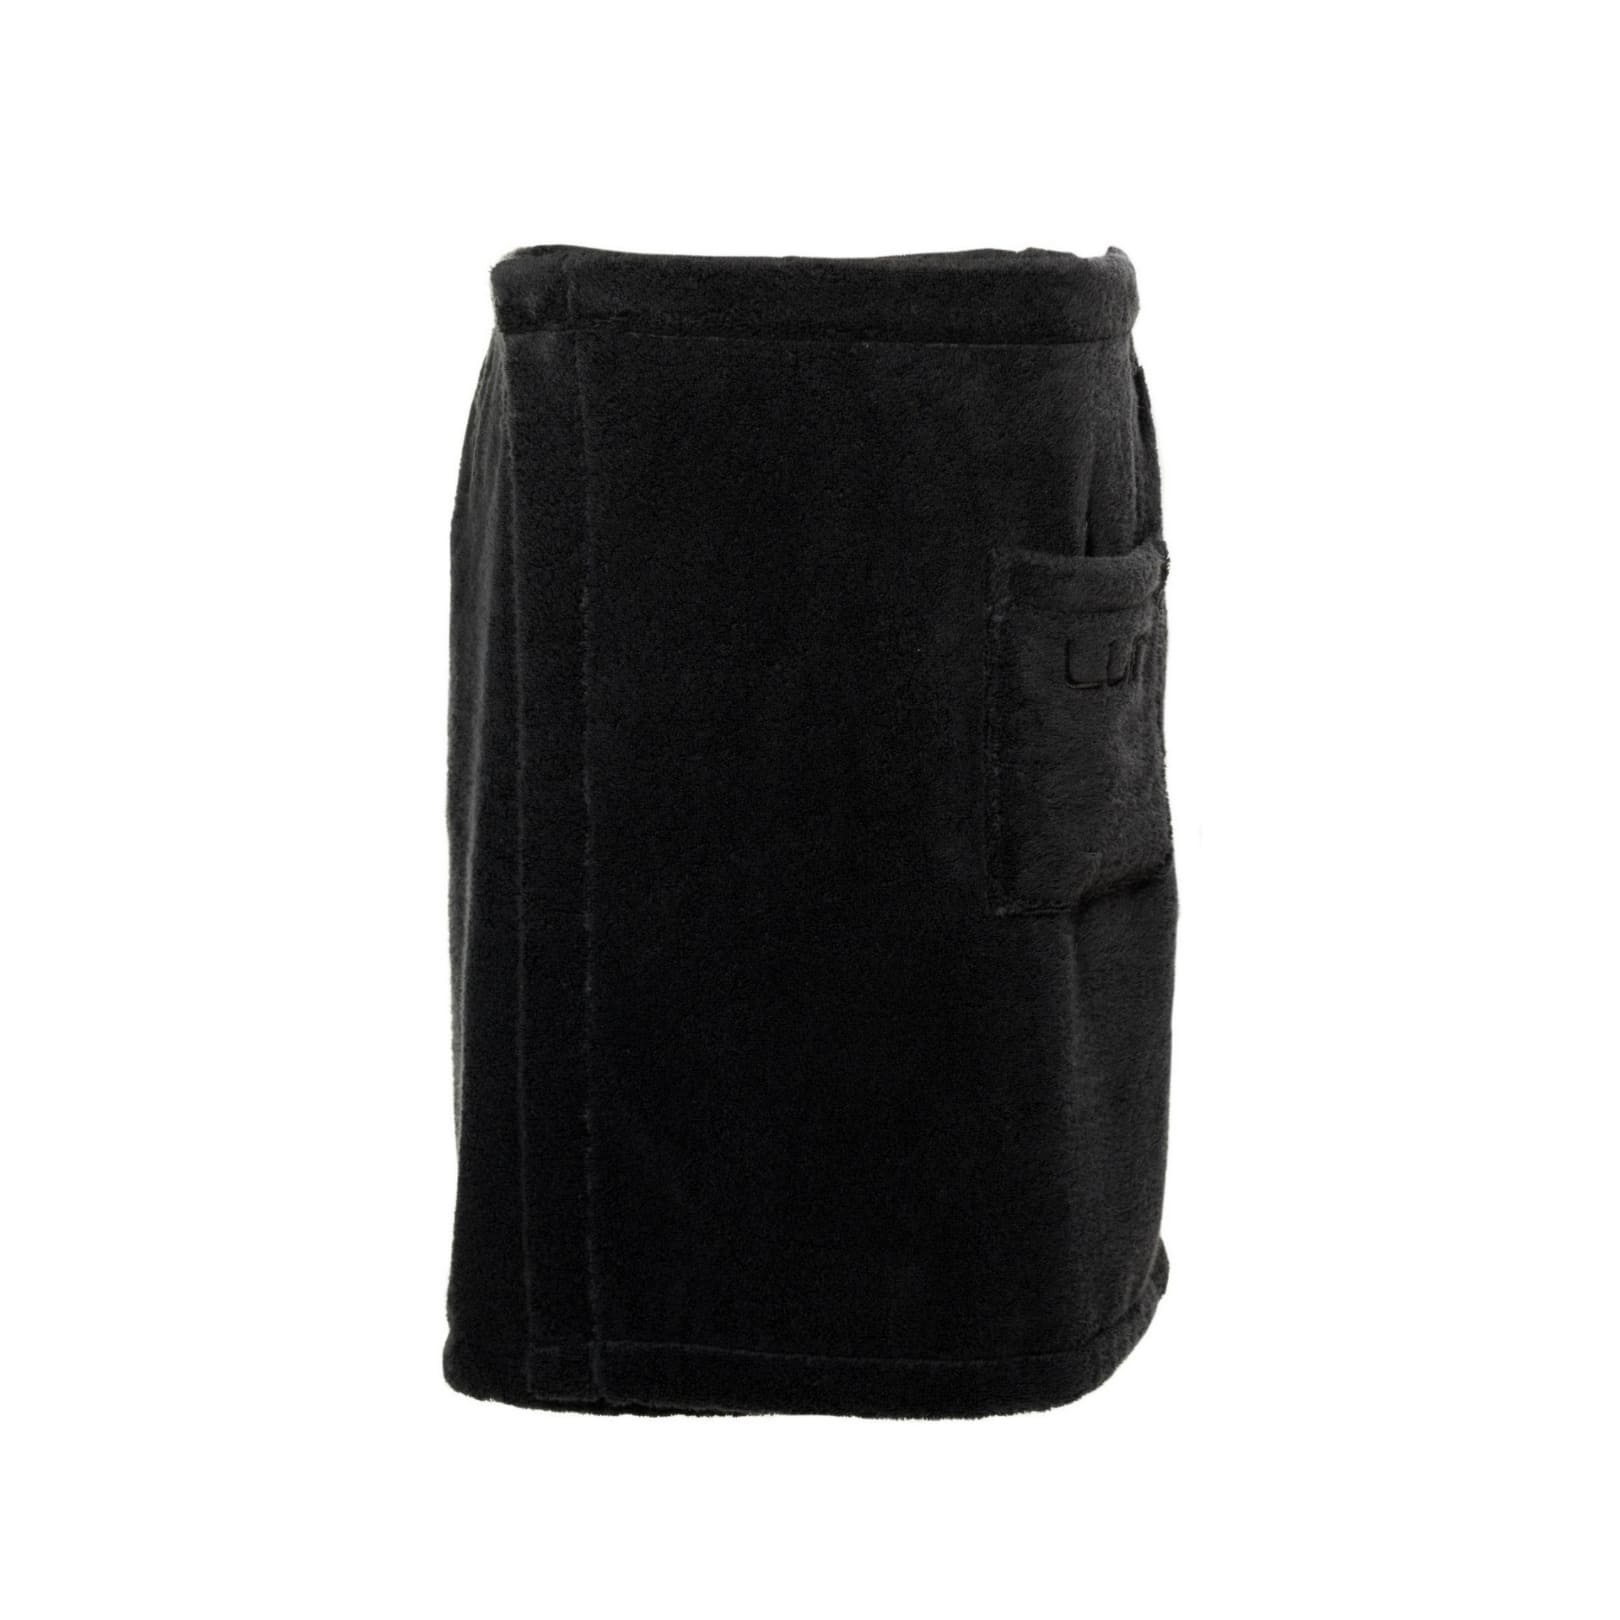 Towel wrap for men black Luin Living Your Home Your Spa